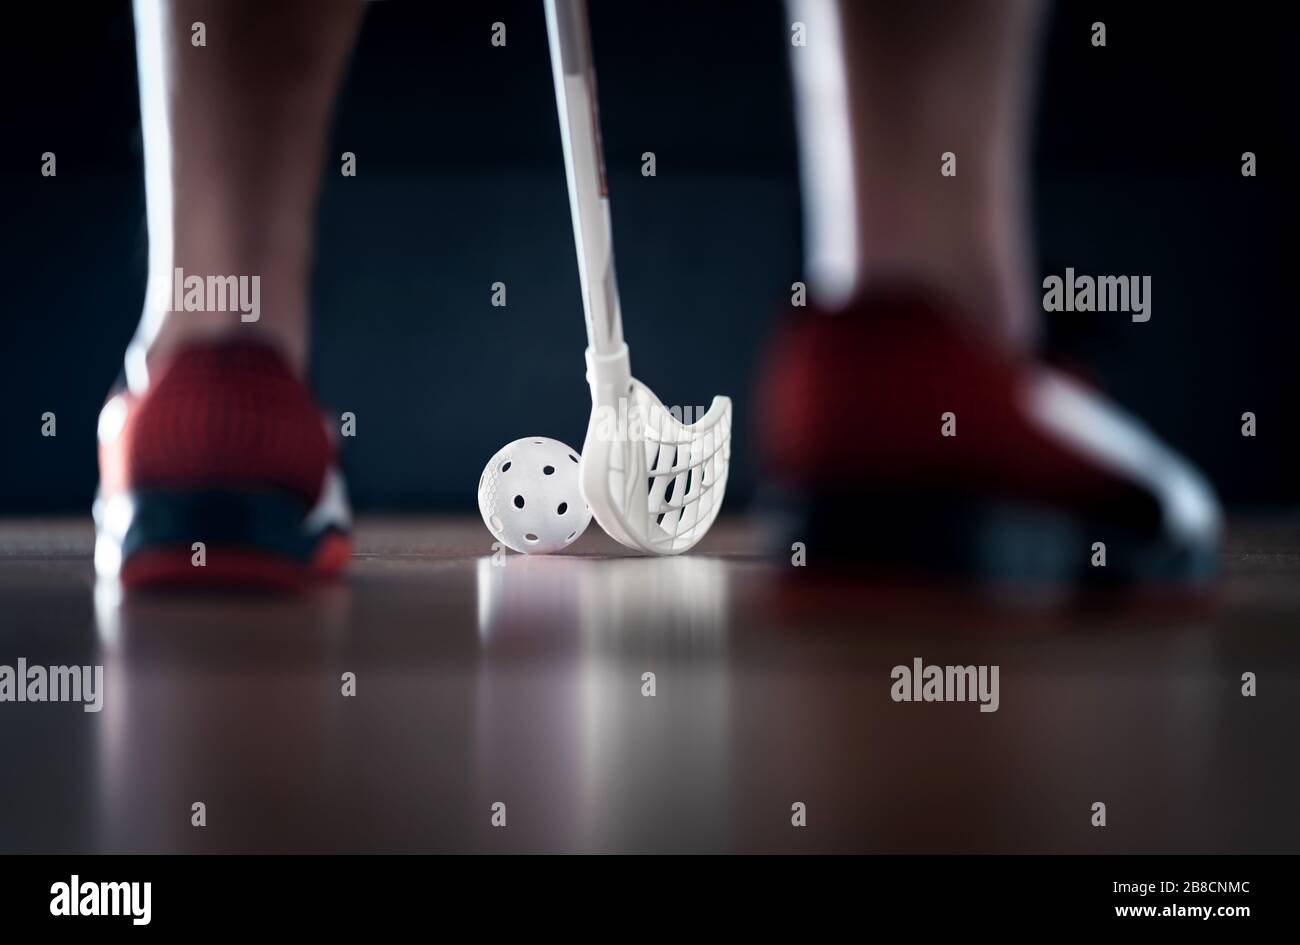 Floorball player standing with stick and ball on. Floor hockey. Back view between sneakers. Dramatic light. Stock Photo